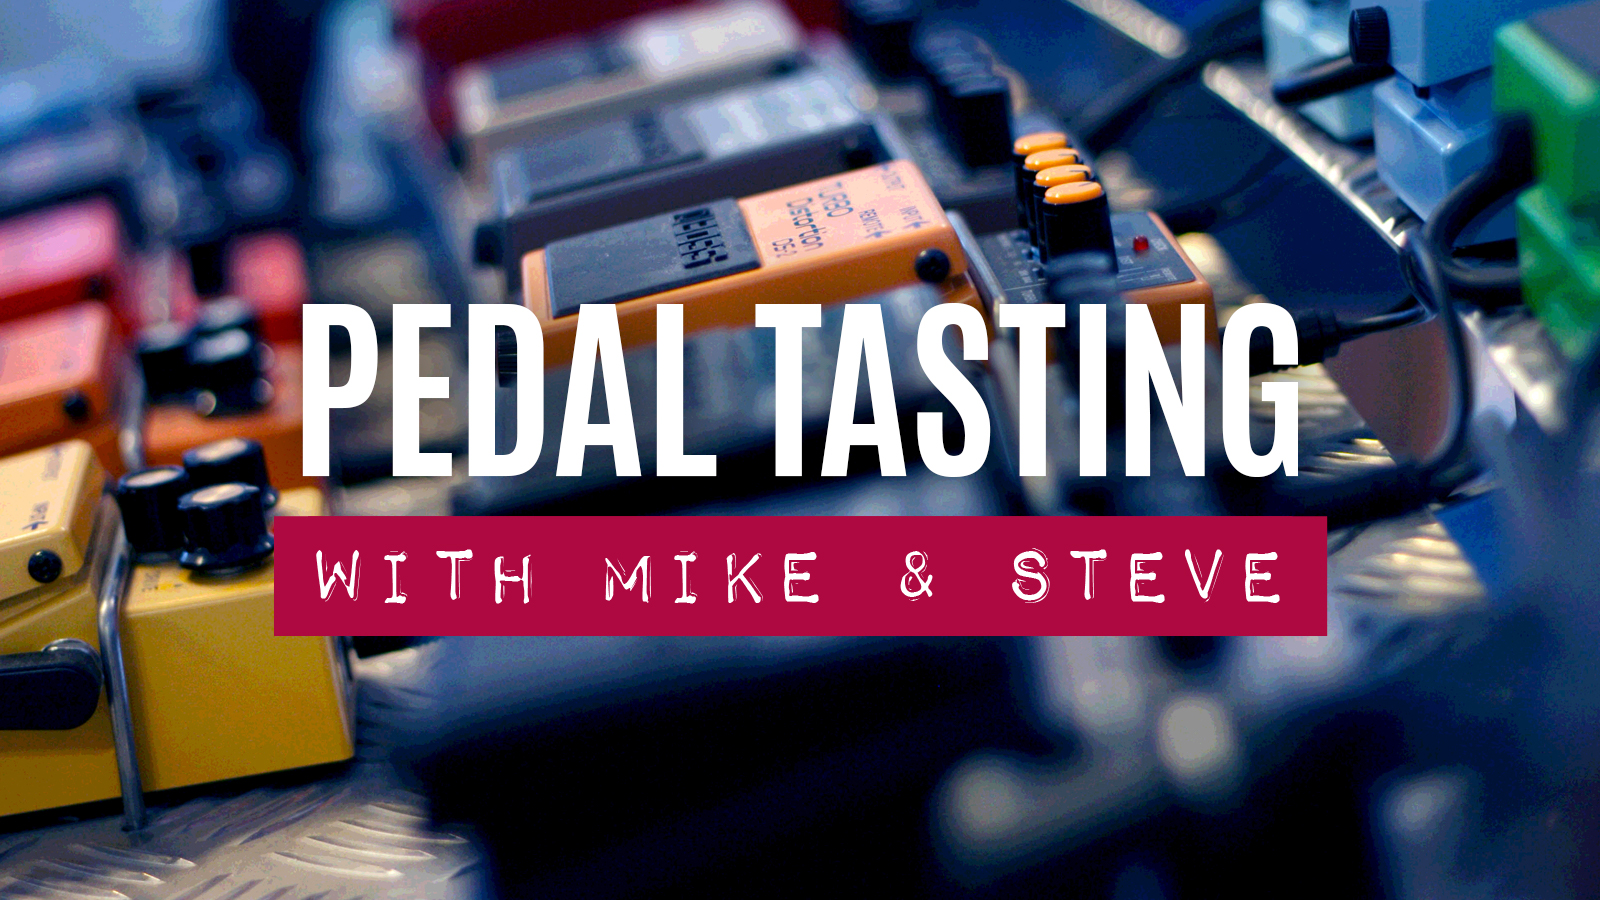 Pedal Tasting with Mike and Steve